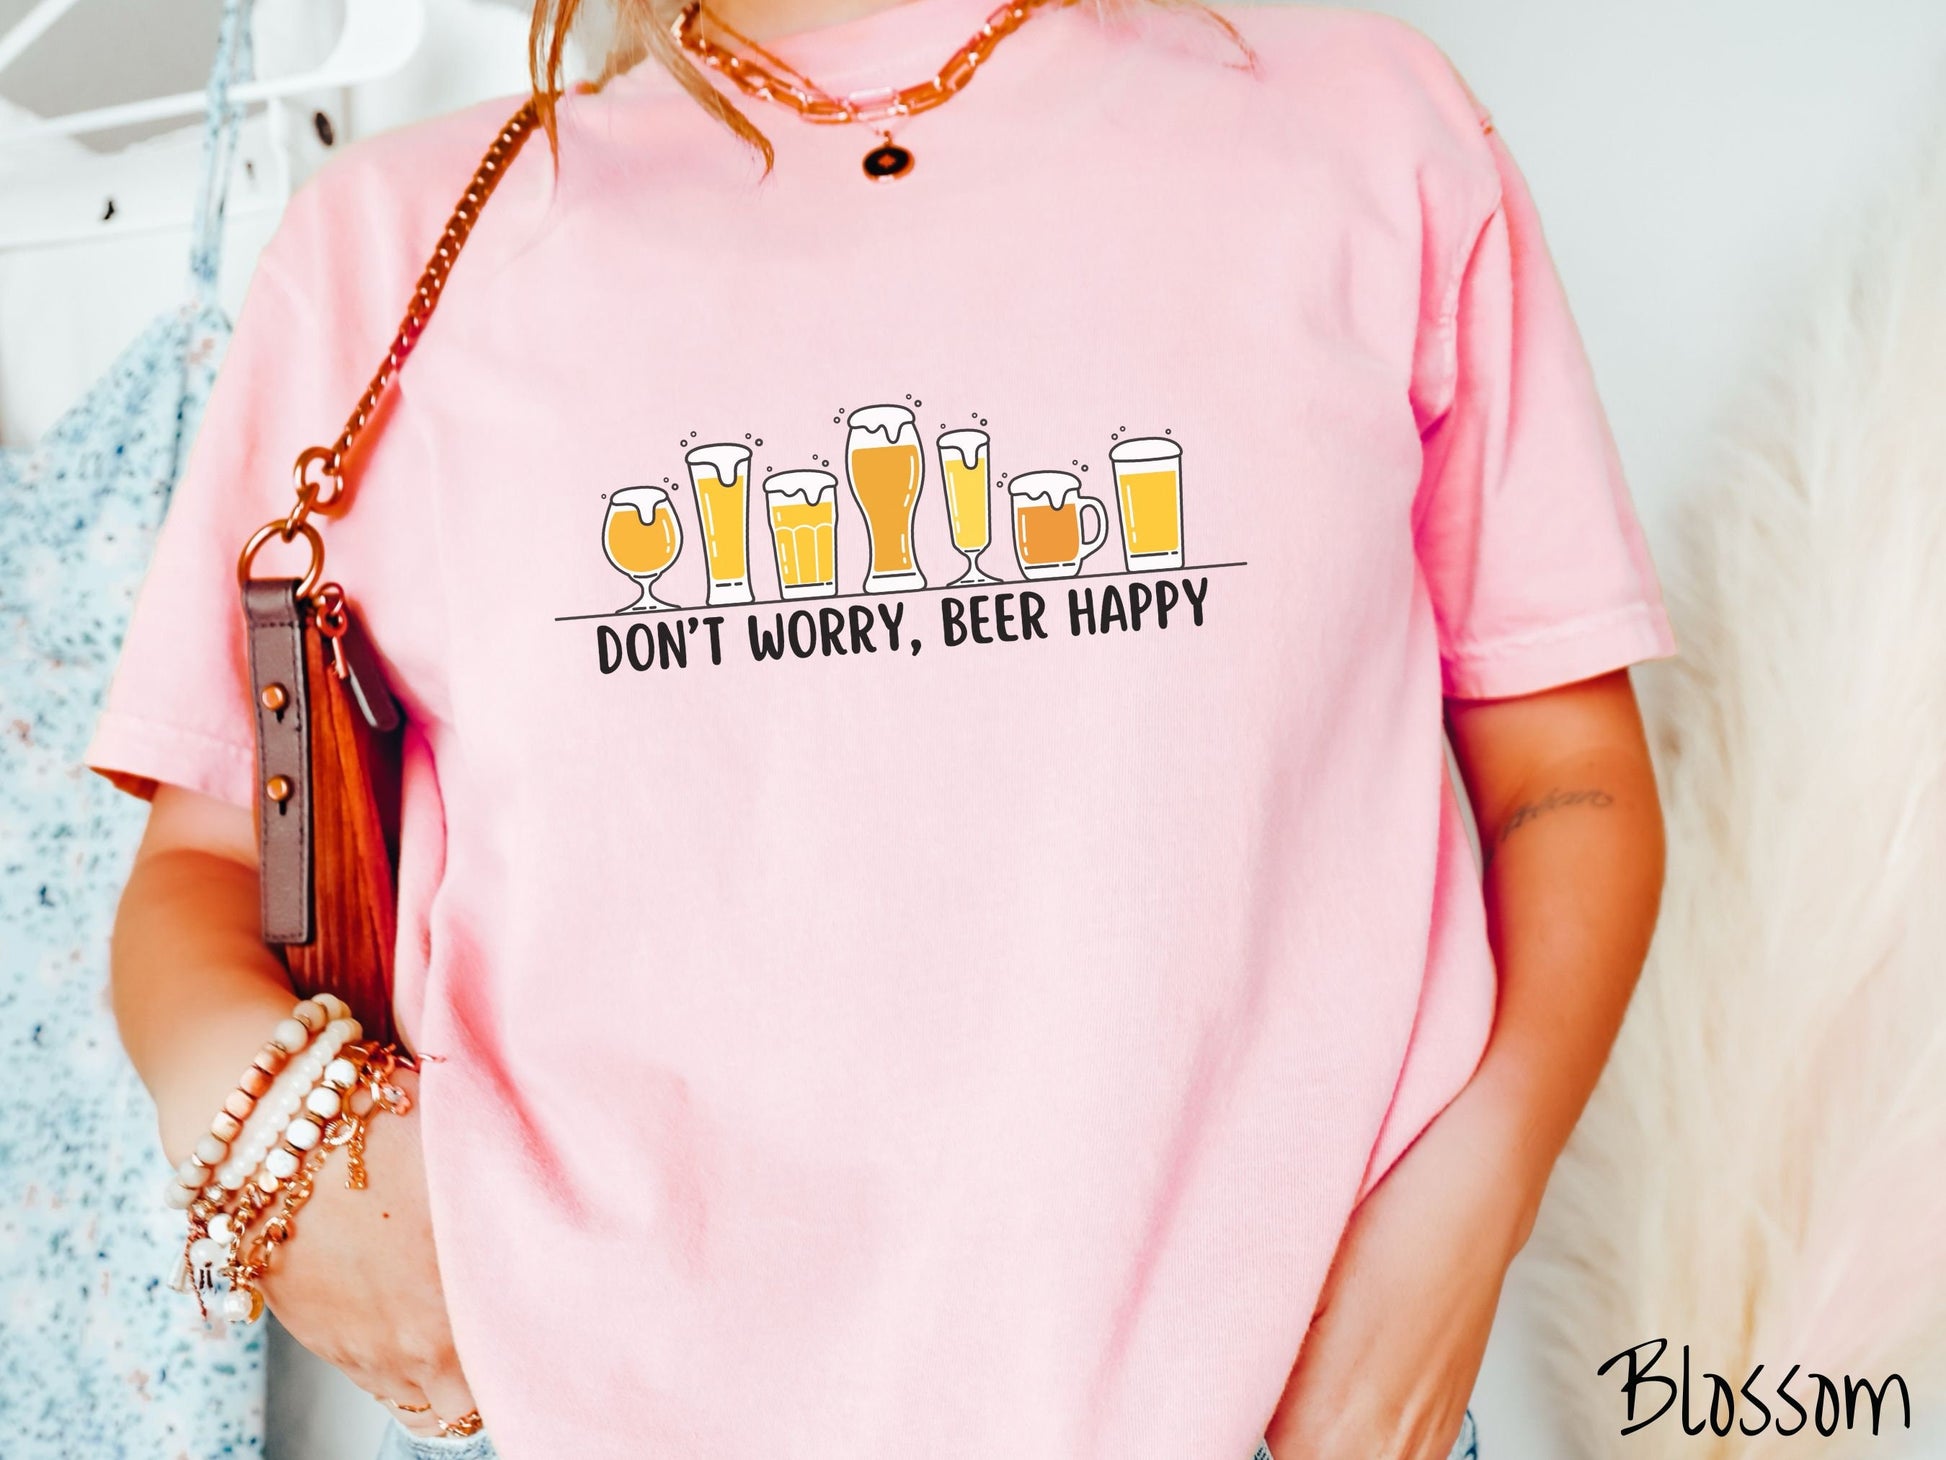 A woman wearing a vintage, blossom colored shirt with the text Dont Worry, Beer happy, and above this are varying sizes and shapes of beer glasses with yellow and orange ber all of them have foam coming out the tops.